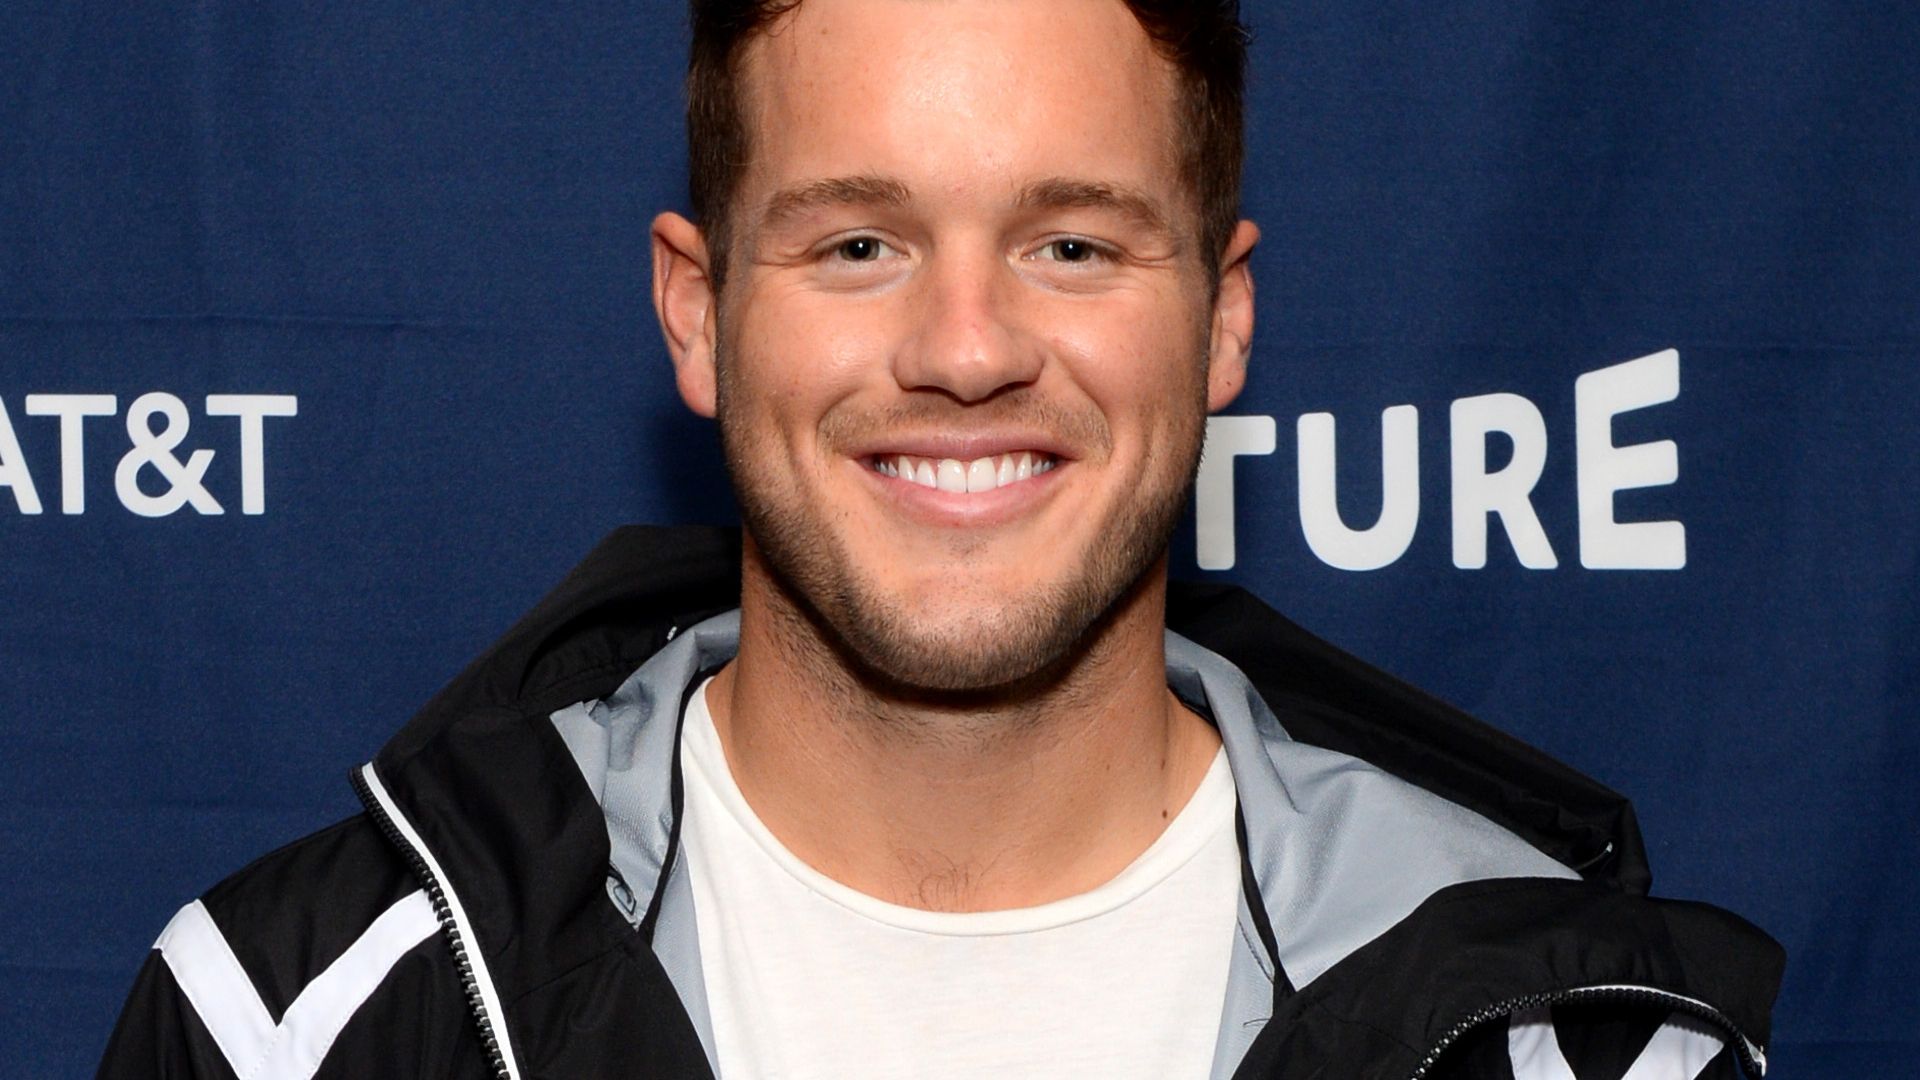 'The Bachelor' star Colton Underwood attends Vulture Festival Presented By AT&T at The Roosevelt Hotel on November 09, 2019 in Hollywood, California.